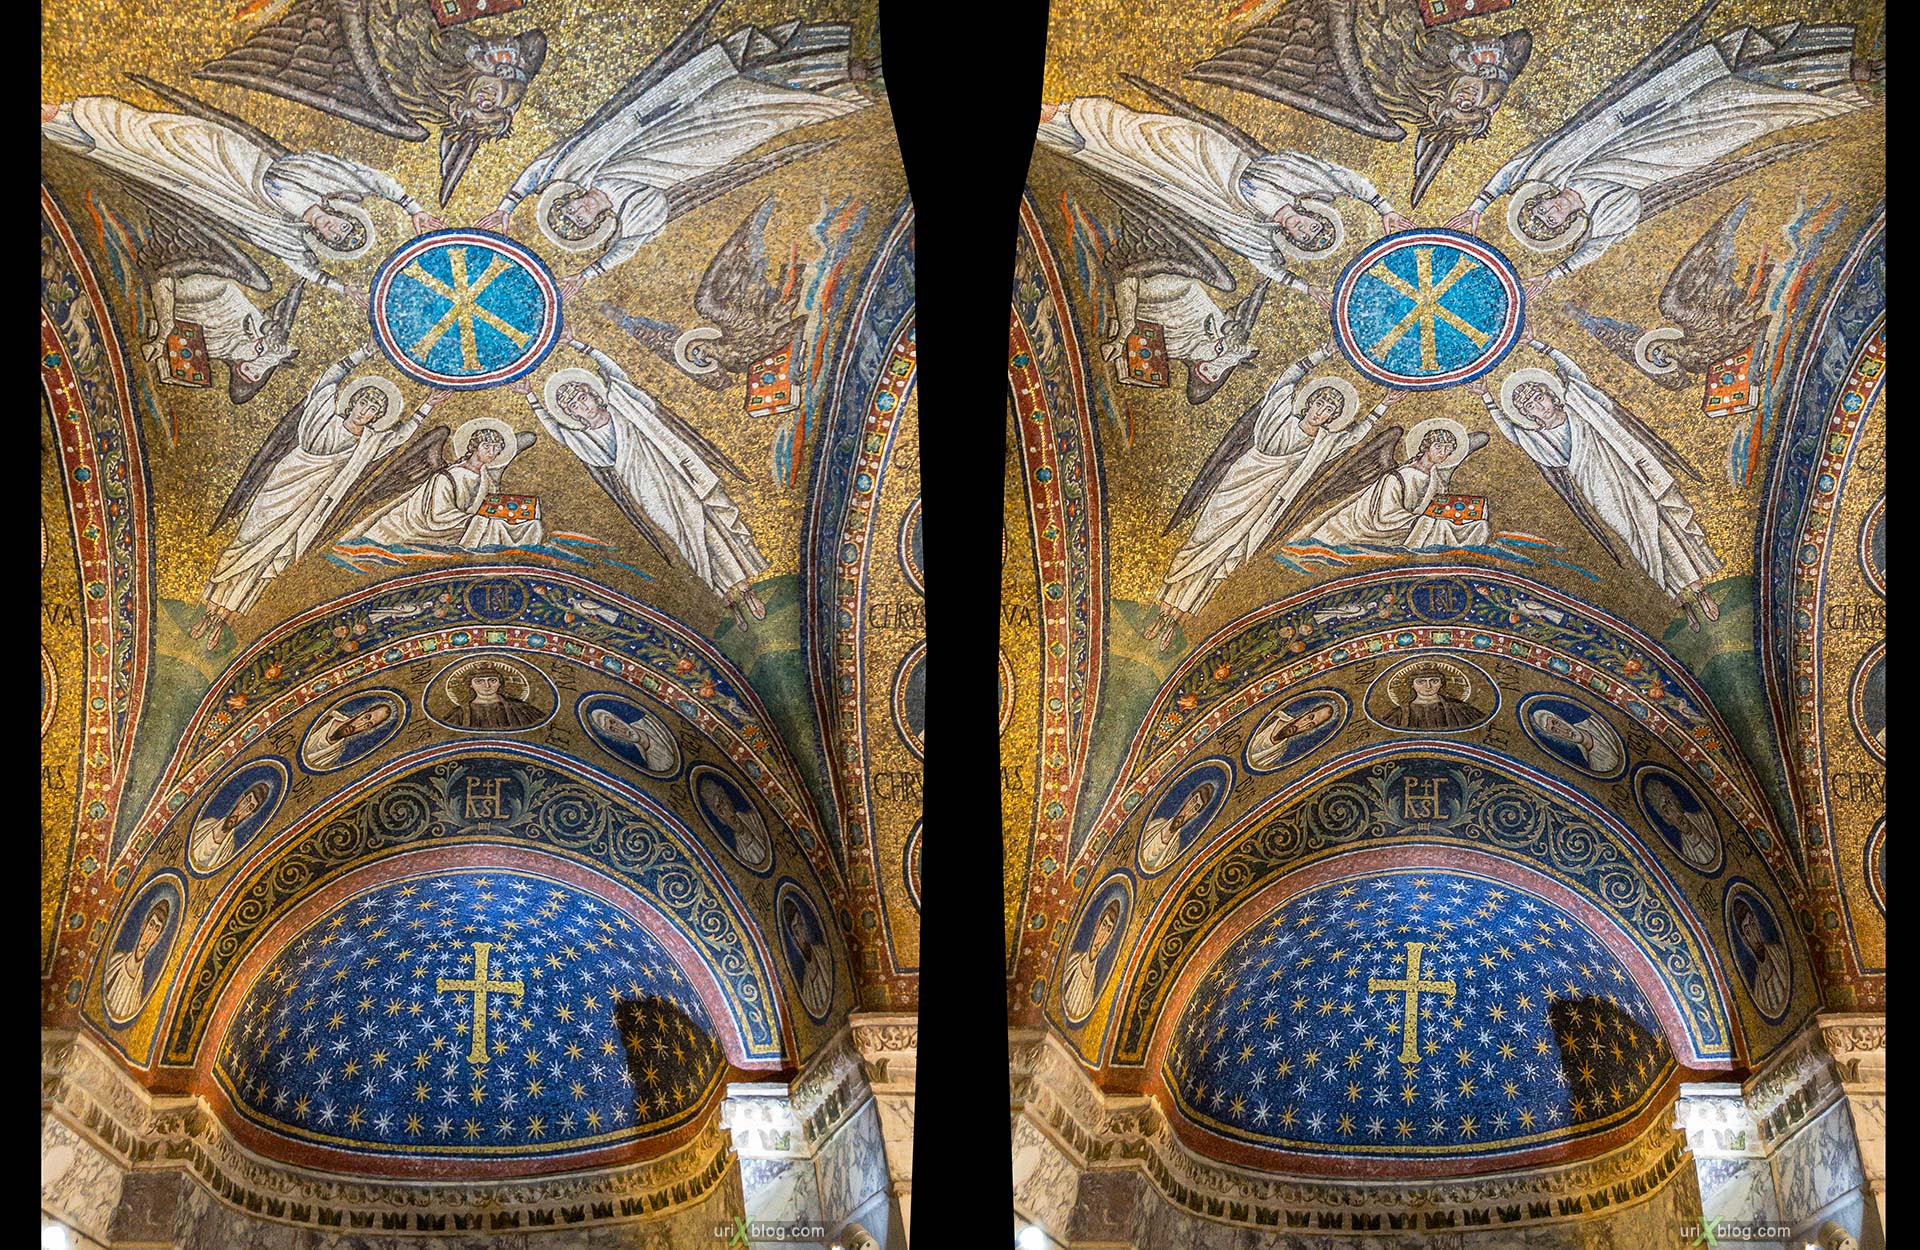 Archiepiscopal Chapel, mosaic, Ravenna, Italy, 3D, stereo pair, cross-eyed, crossview, cross view stereo pair, stereoscopic